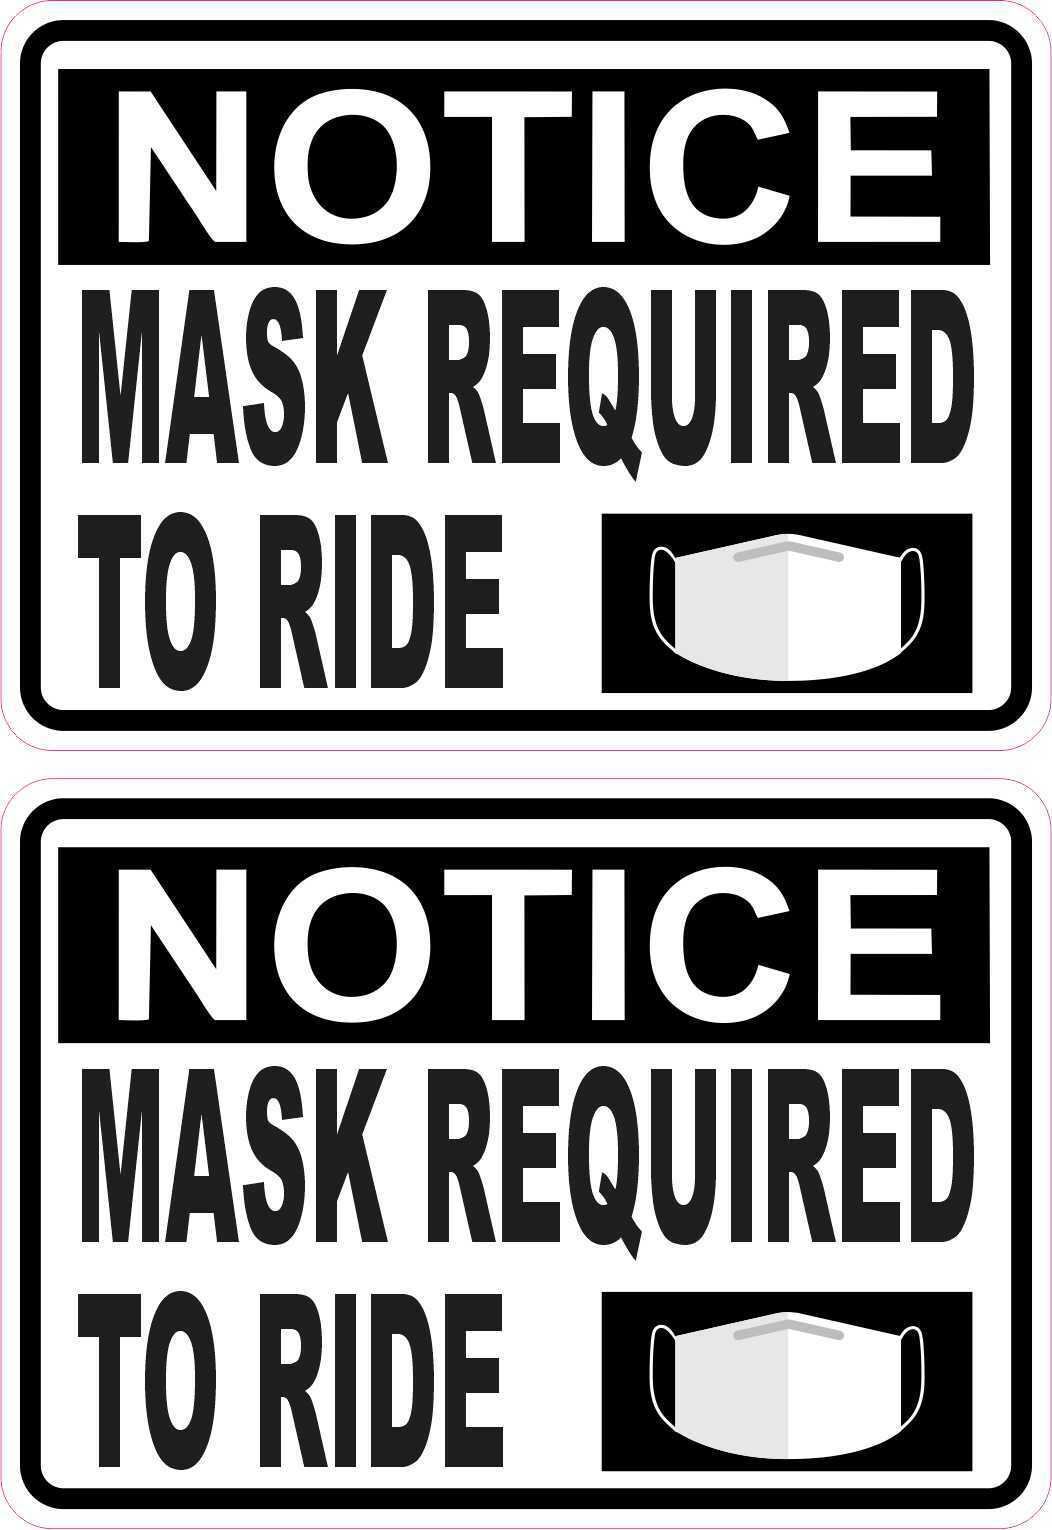 3.5in x 2.5in Mask Required to Ride Vinyl Stickers Car Vehicle Bumper Decal